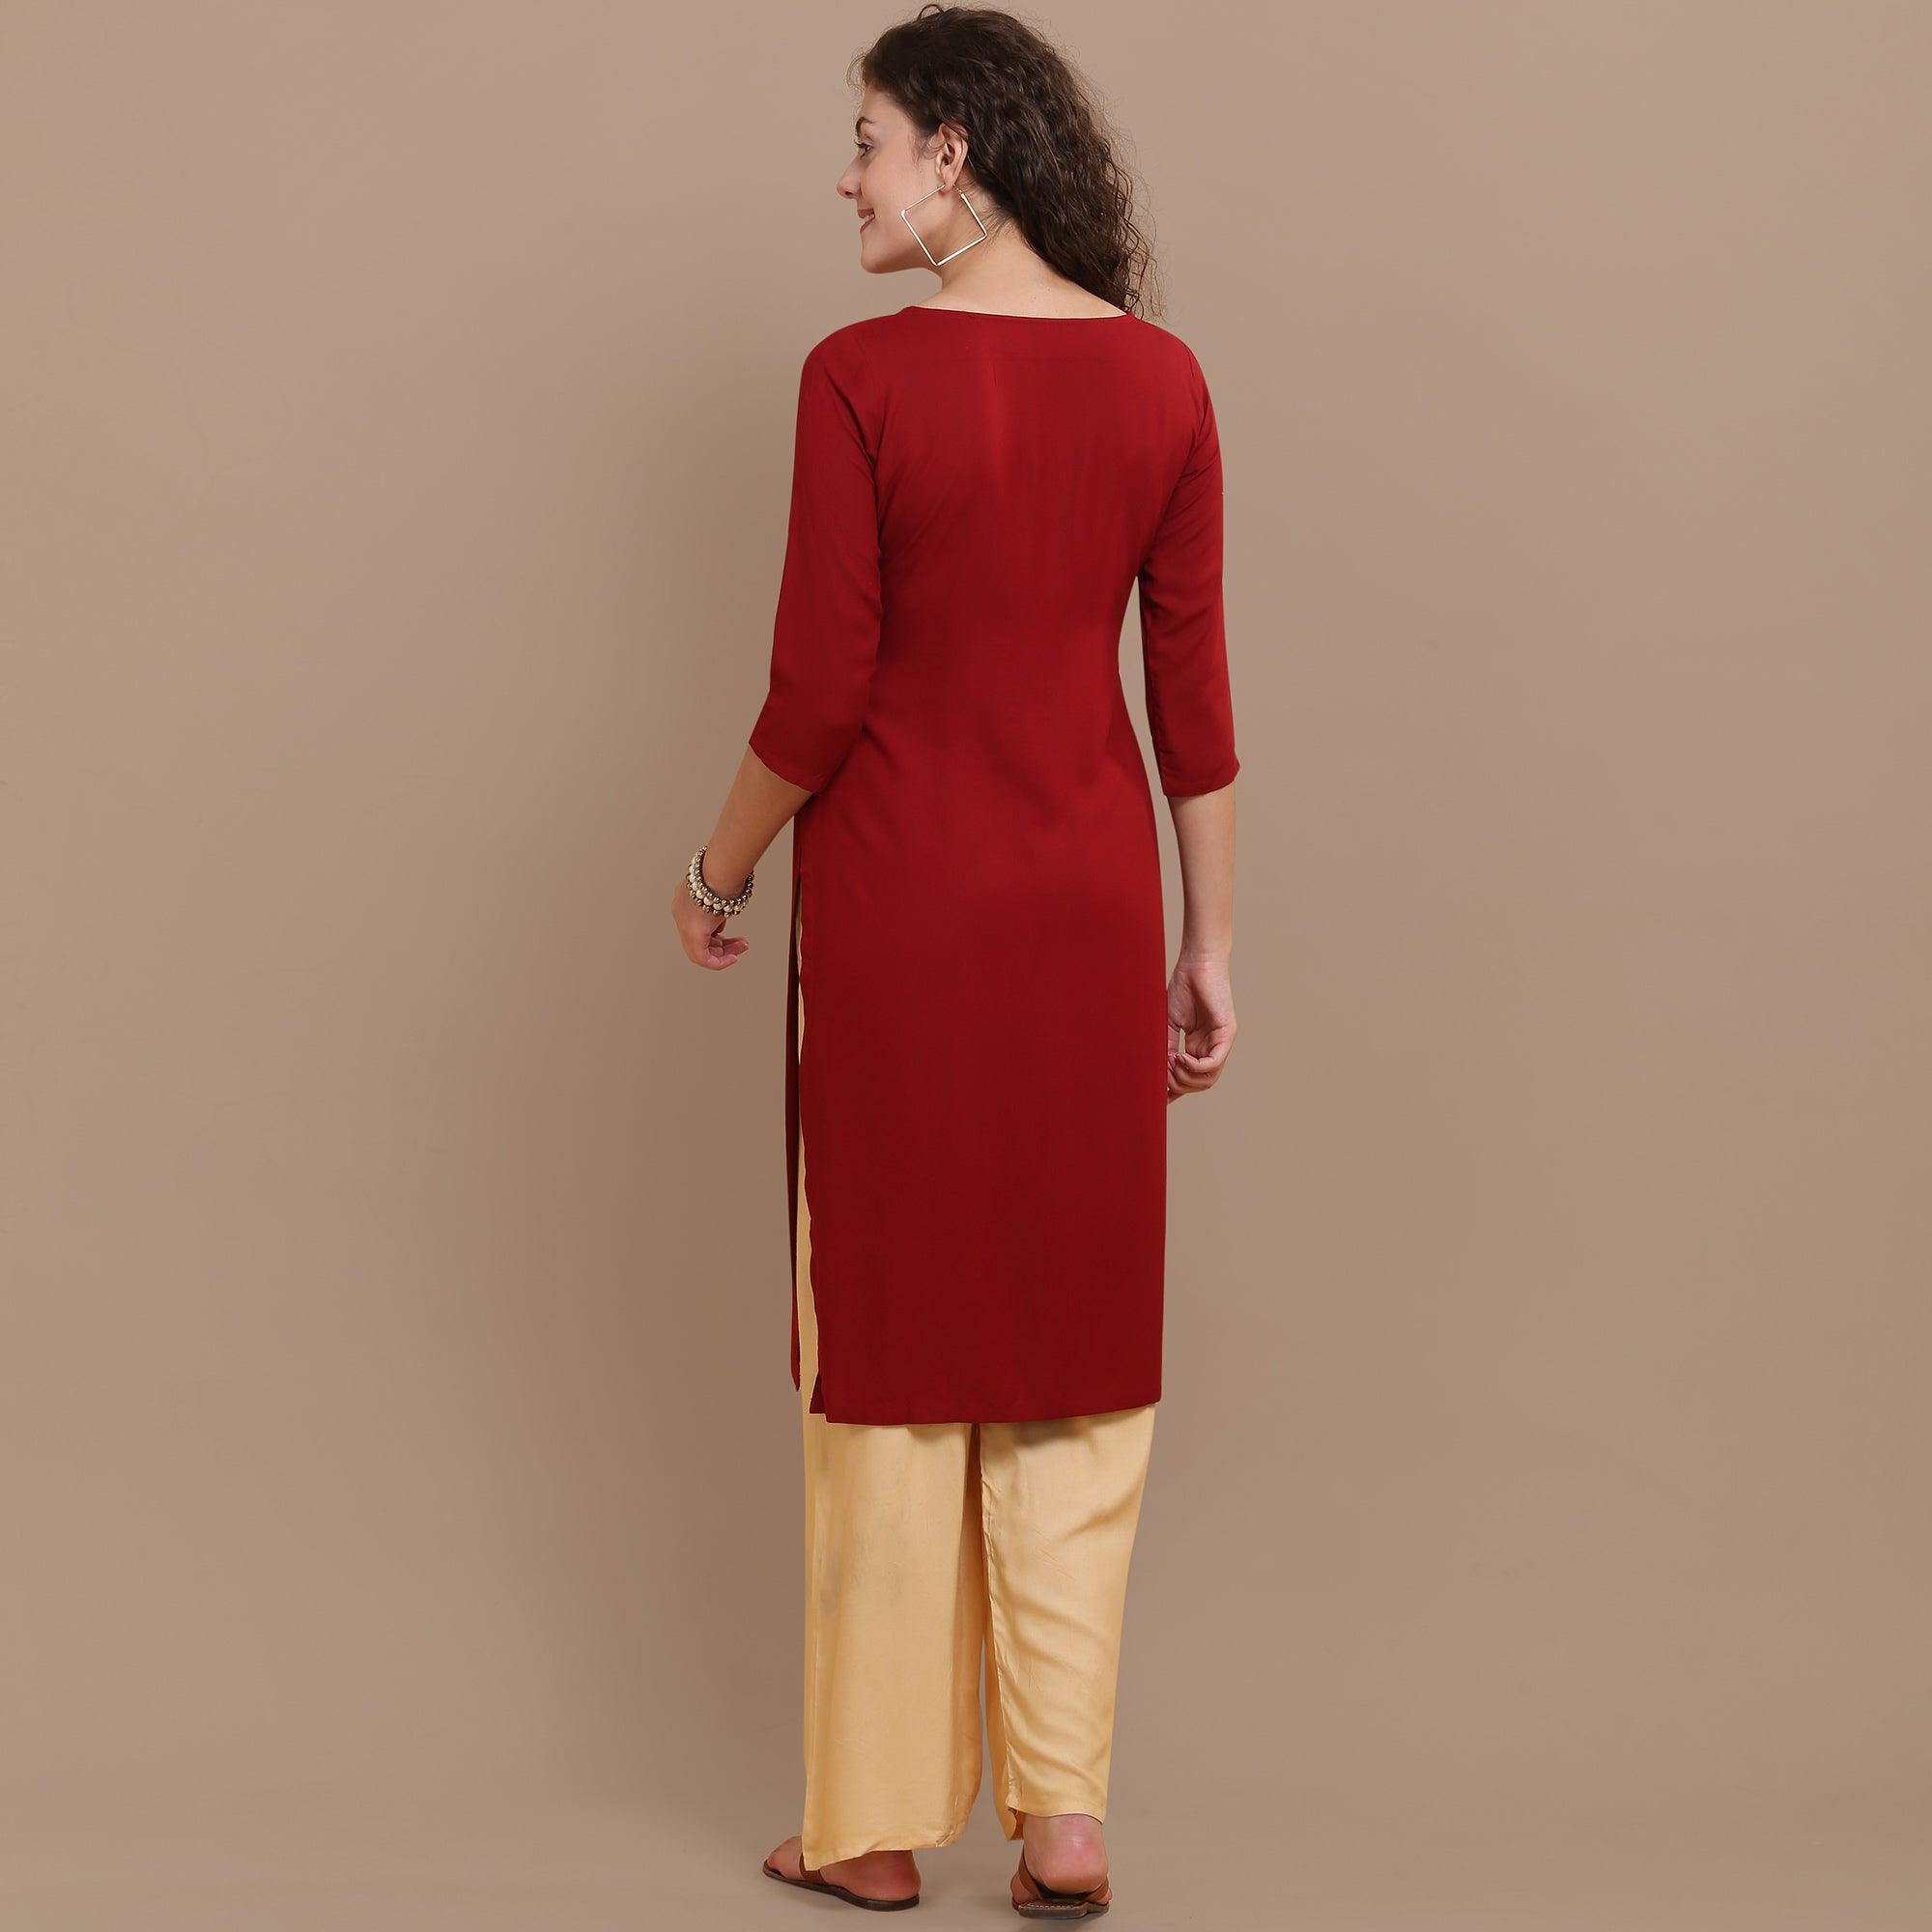 Classy Maroon Colored Partywear Floral Embroidered Rayon Kurti - Peachmode